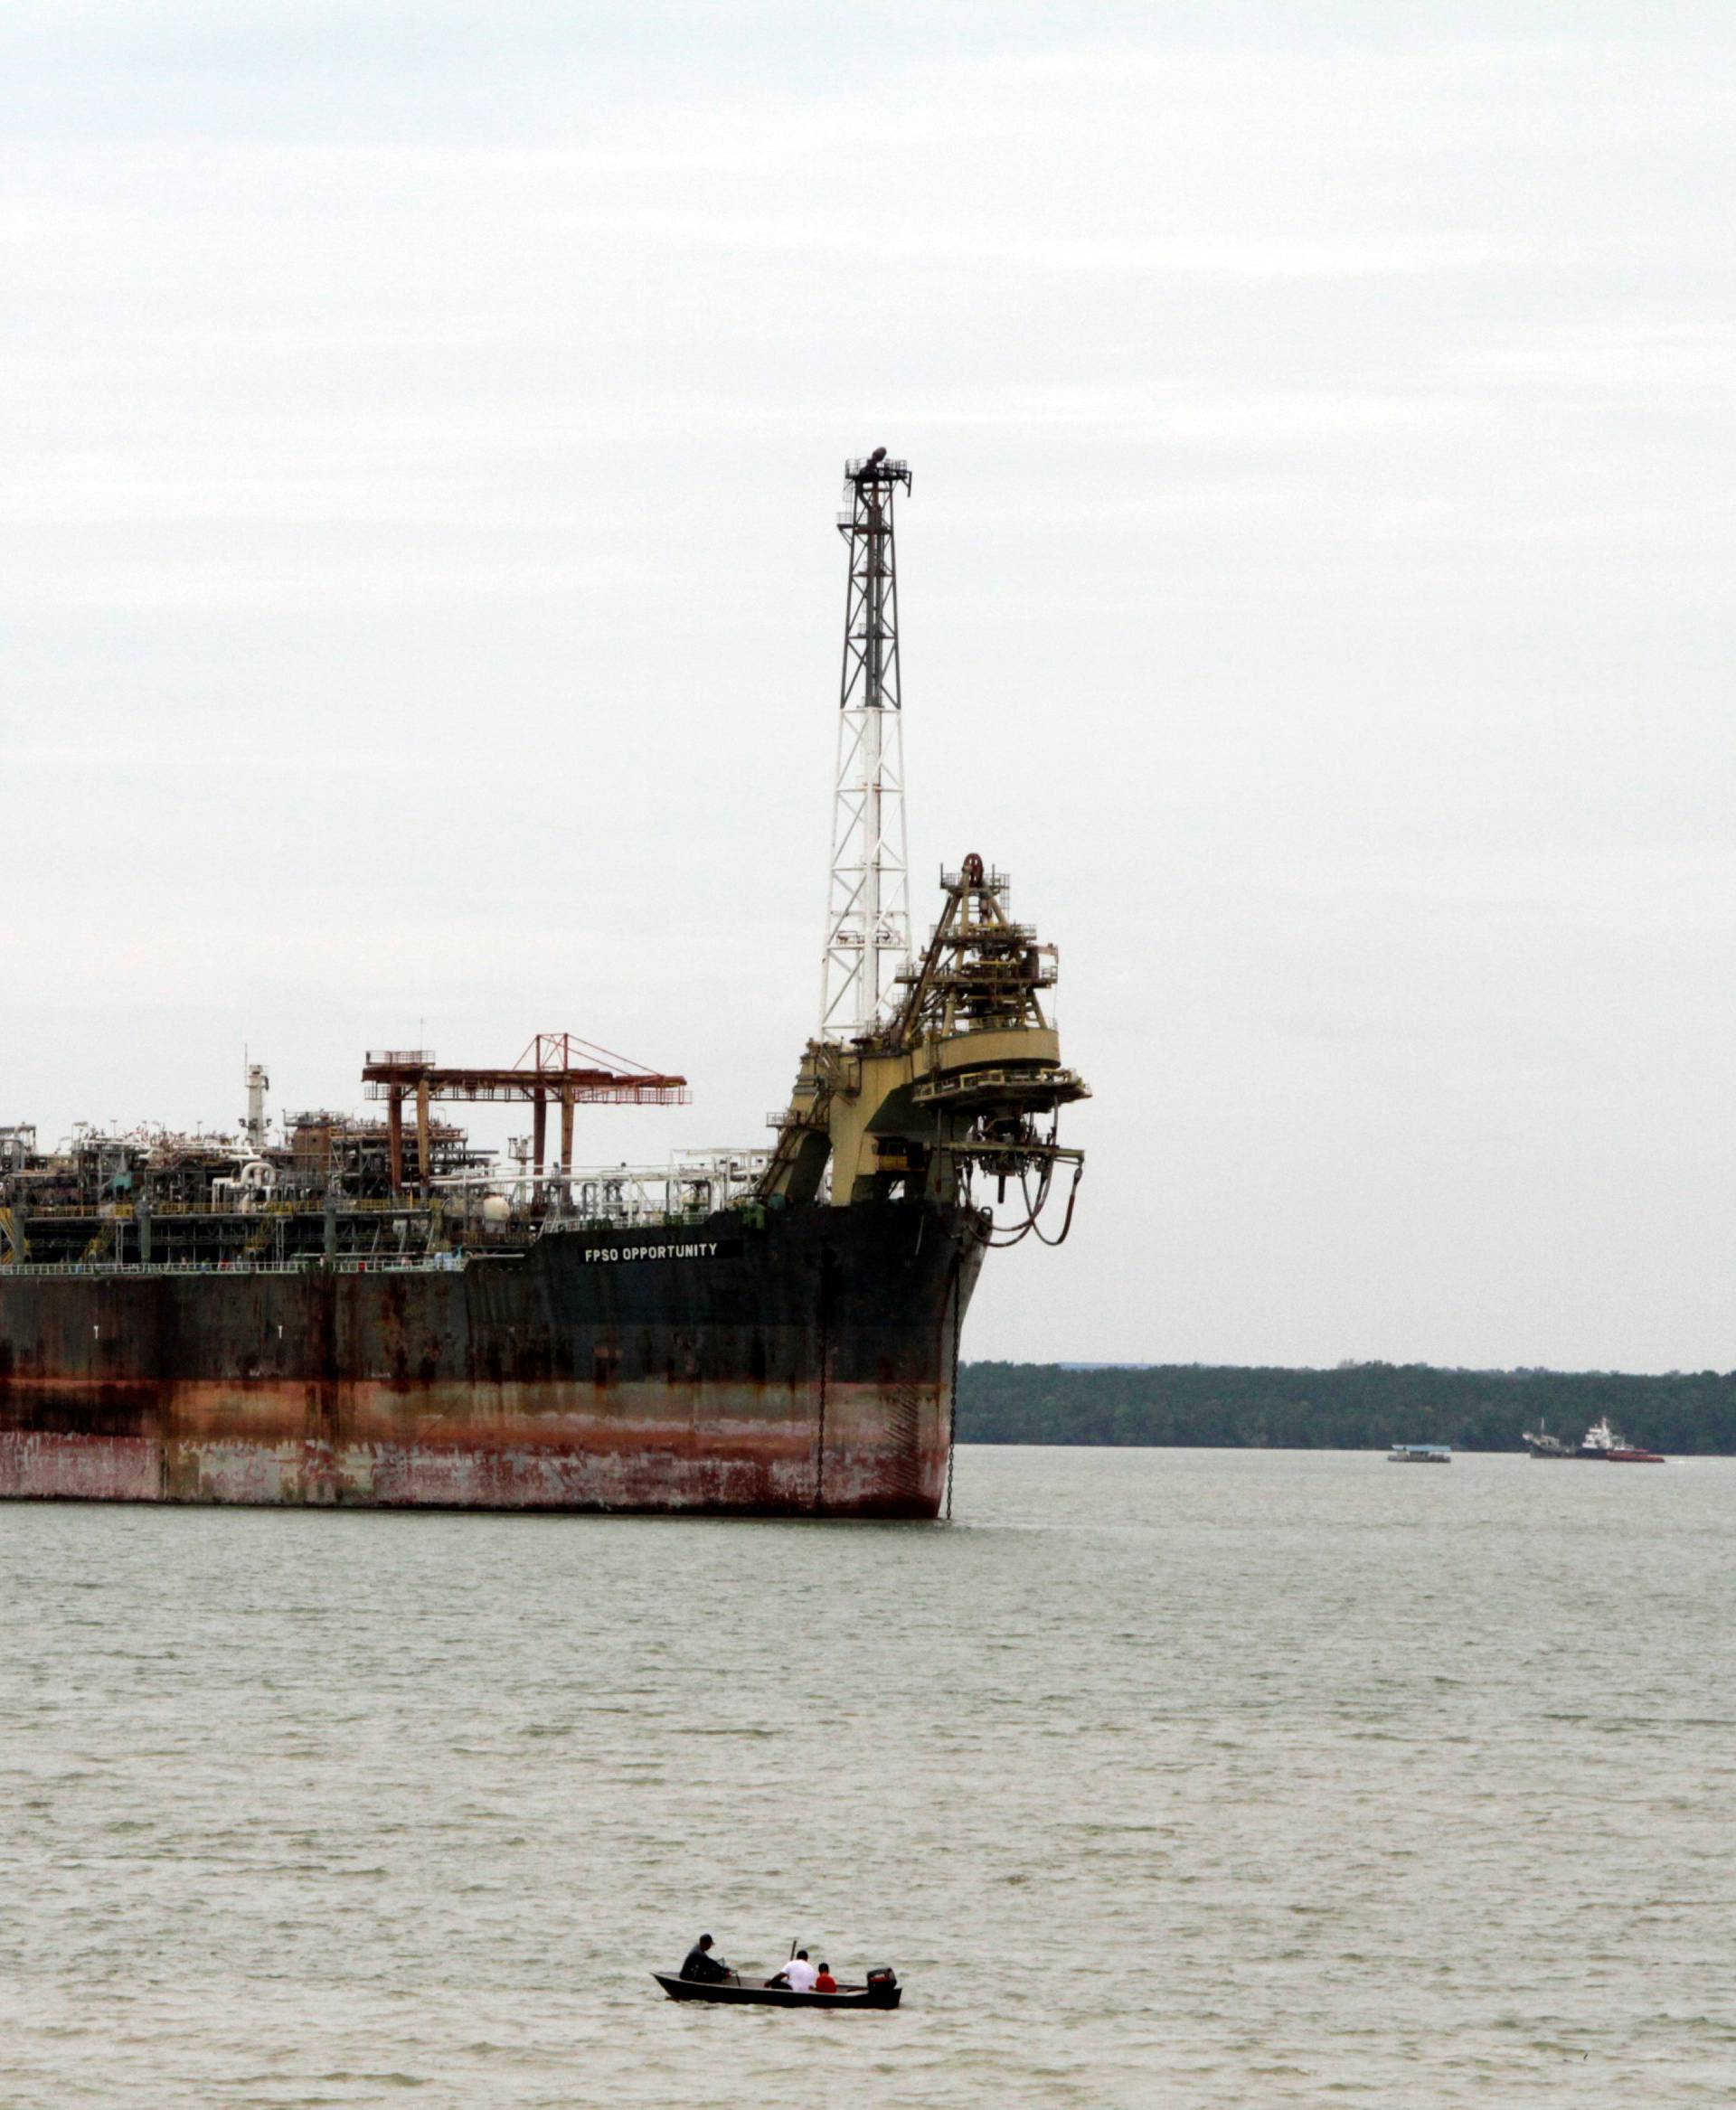 A fishing boat passes in front of the laid-up FPSO Opportunity in the Johor river